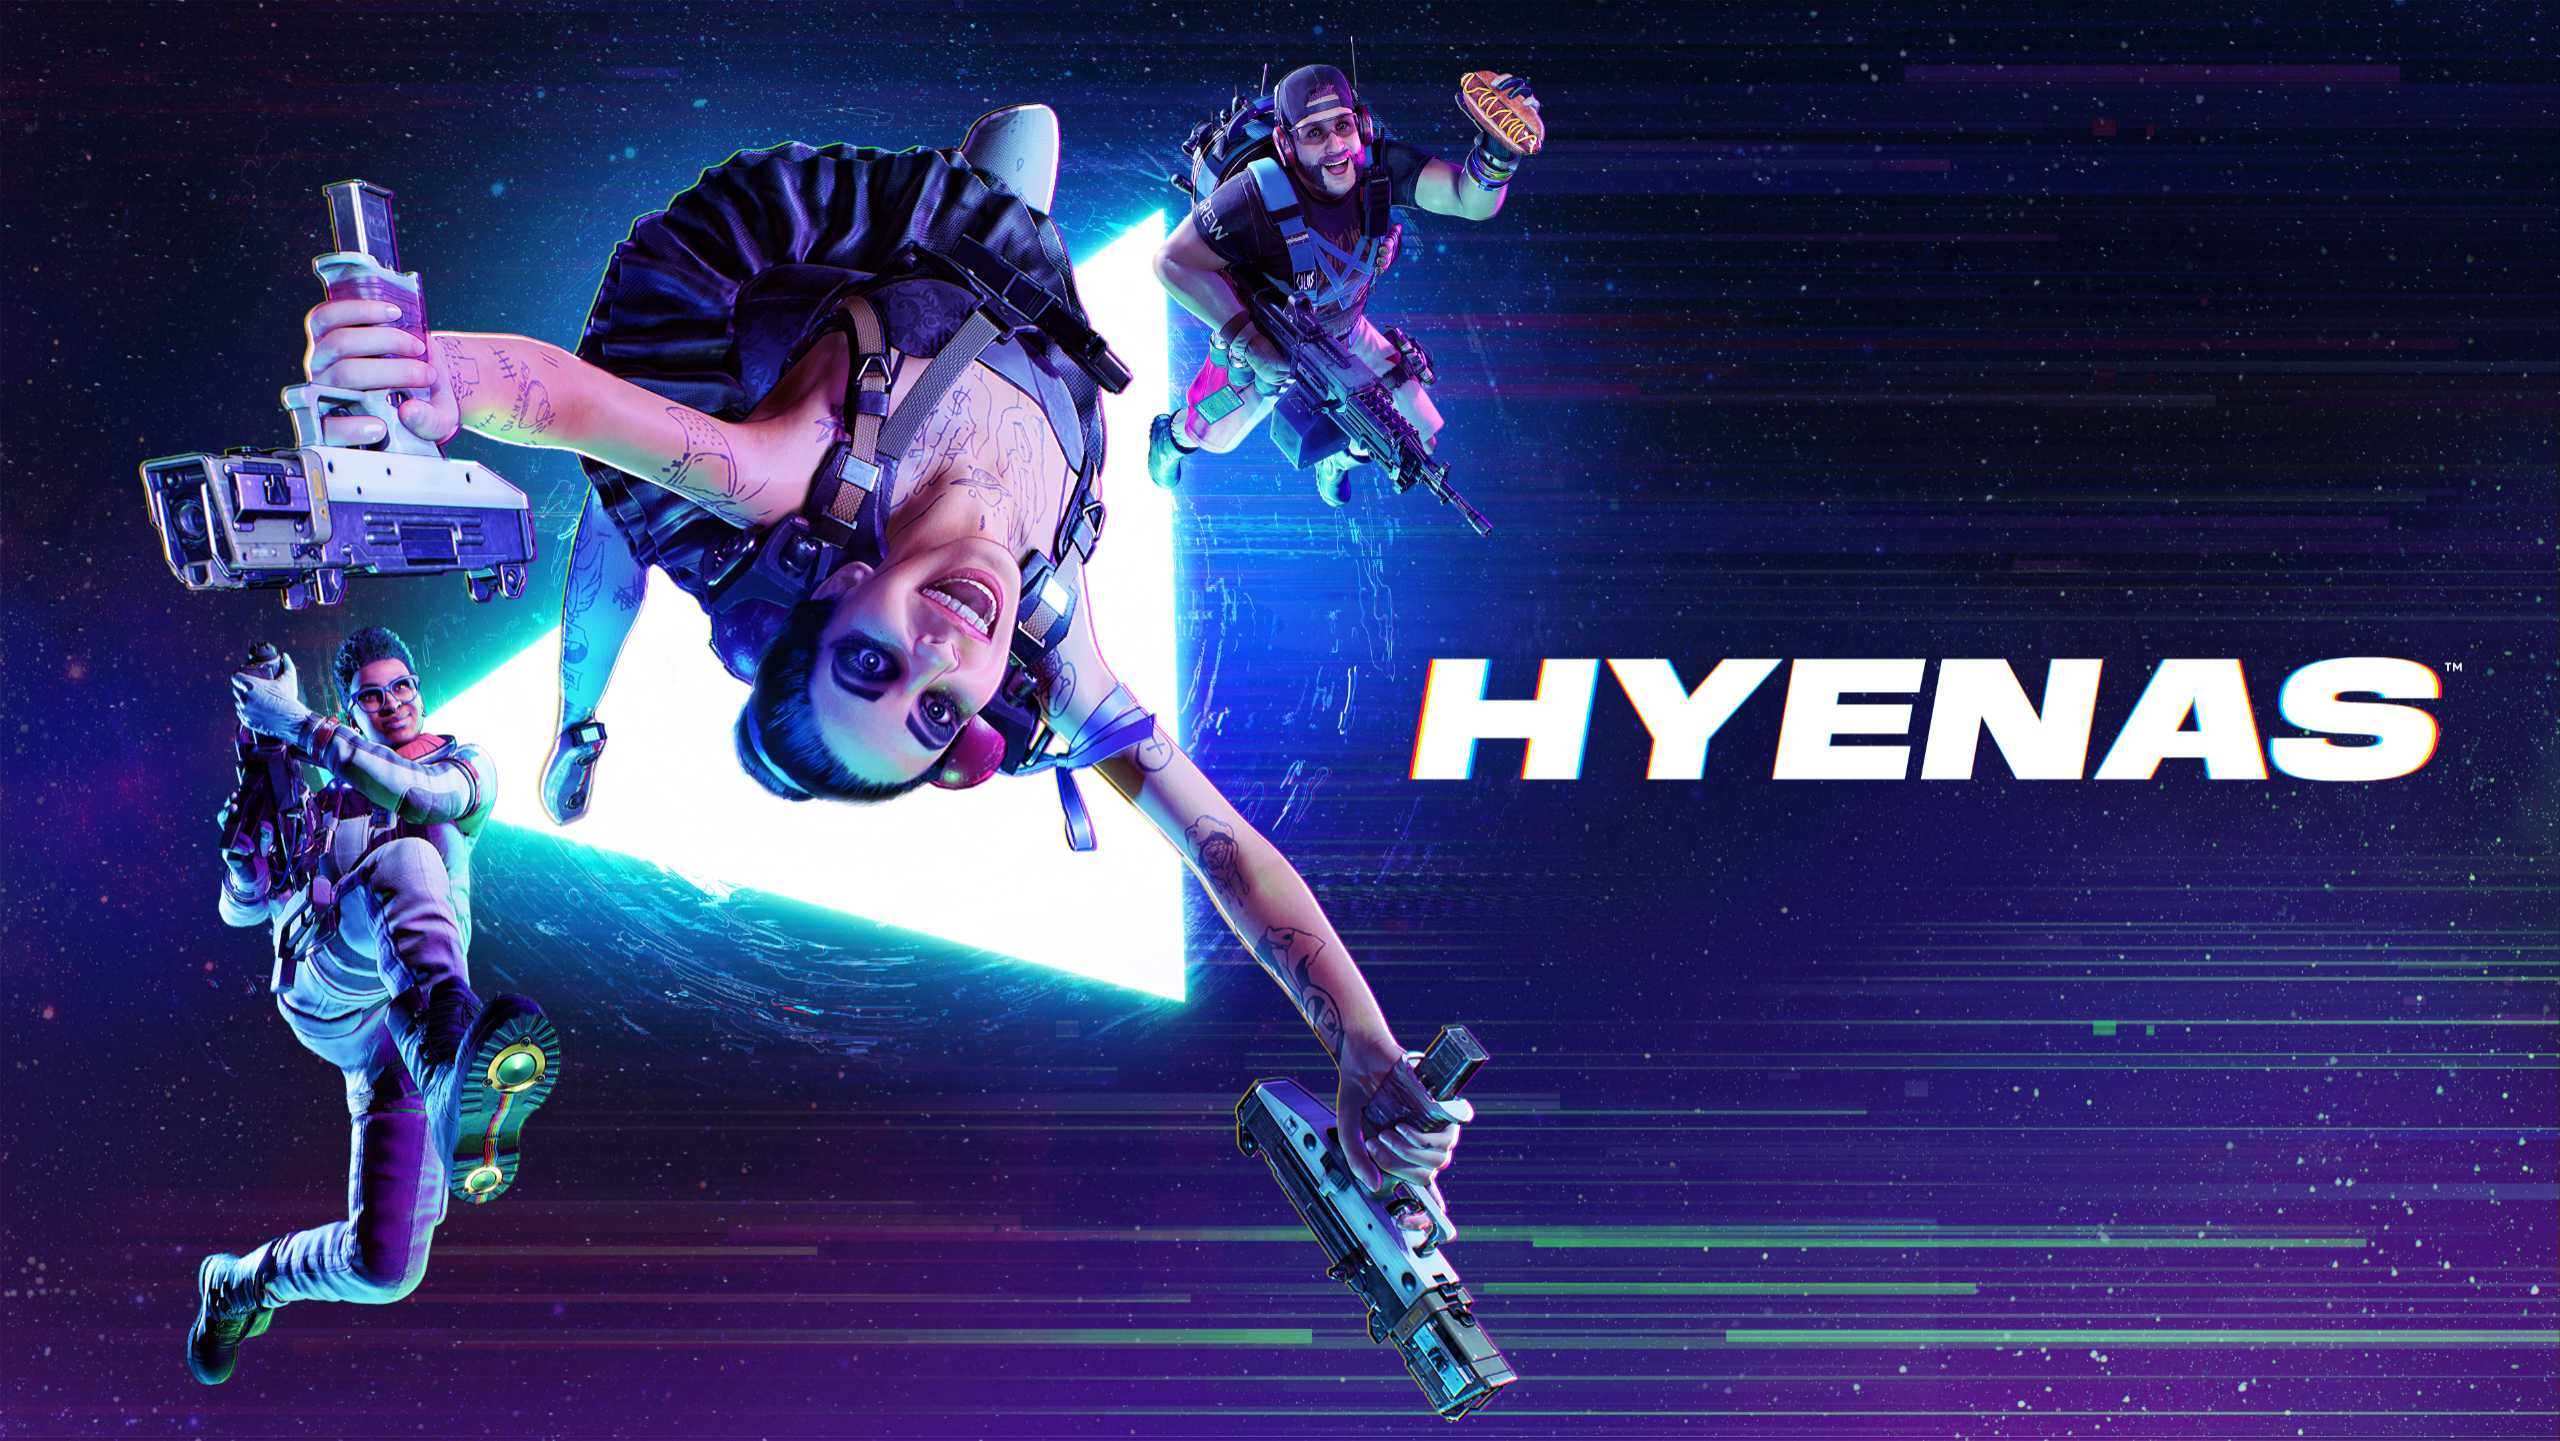 Launching the demo version of the game HYENAS – Gamers.at